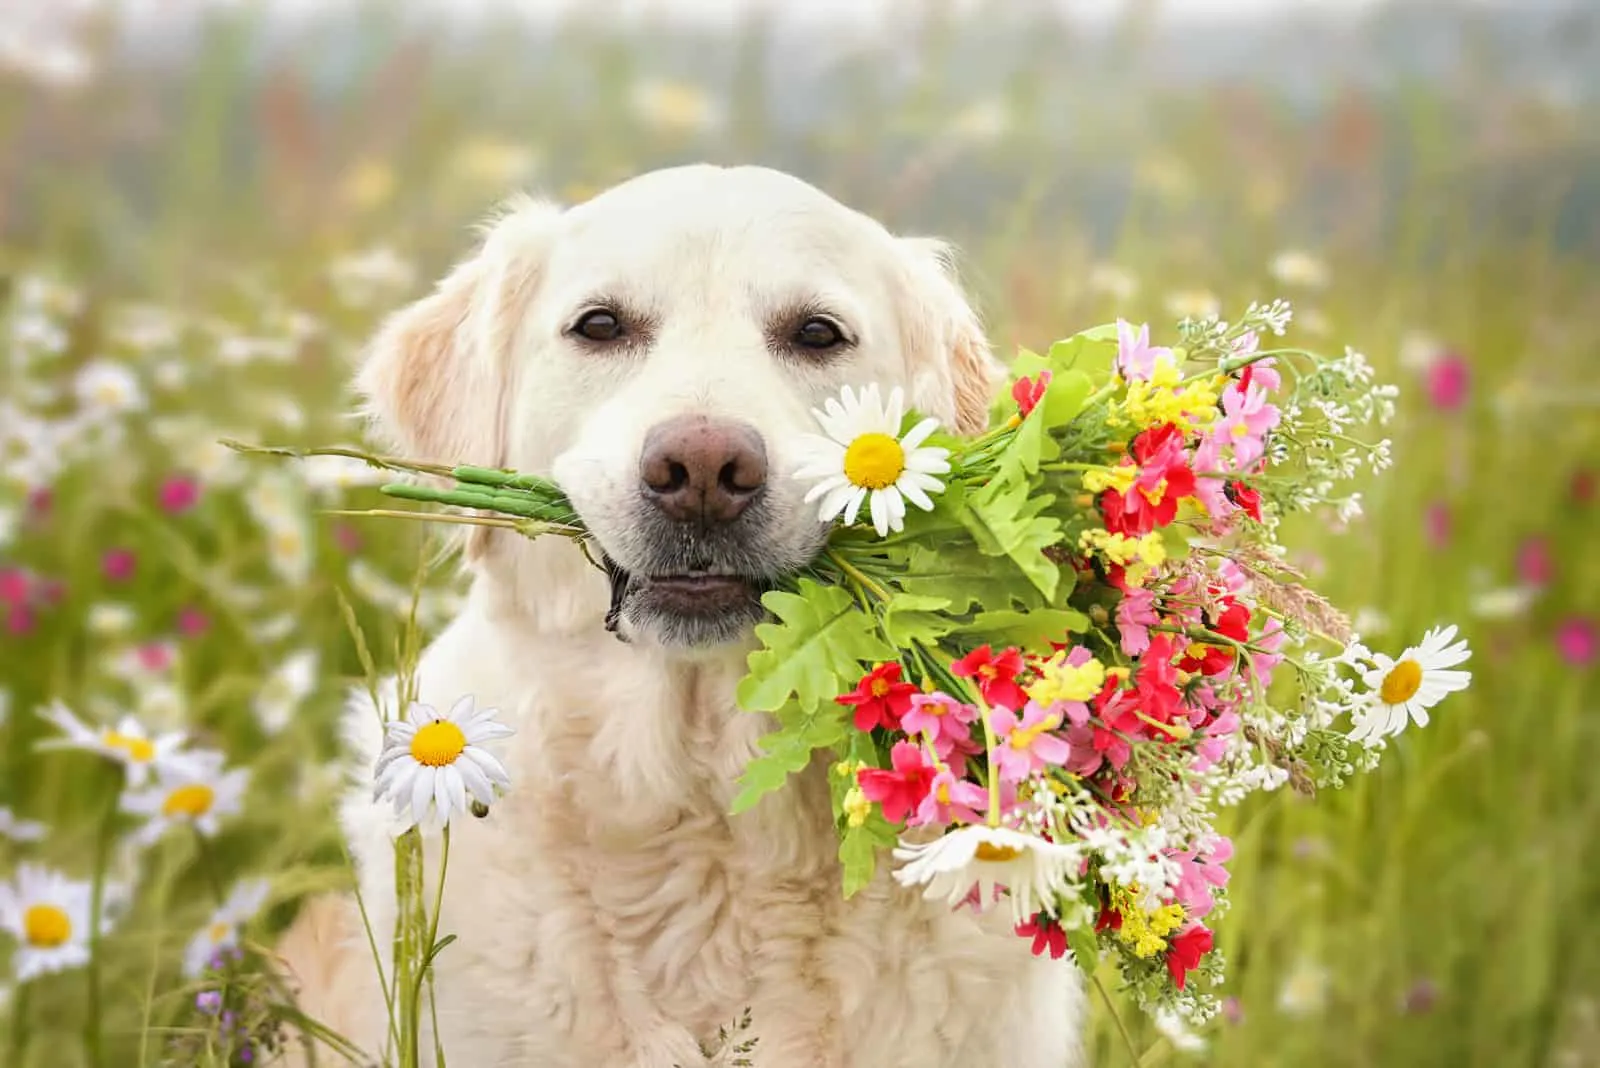 Dog sitting with flowers in the mouth in a meadow